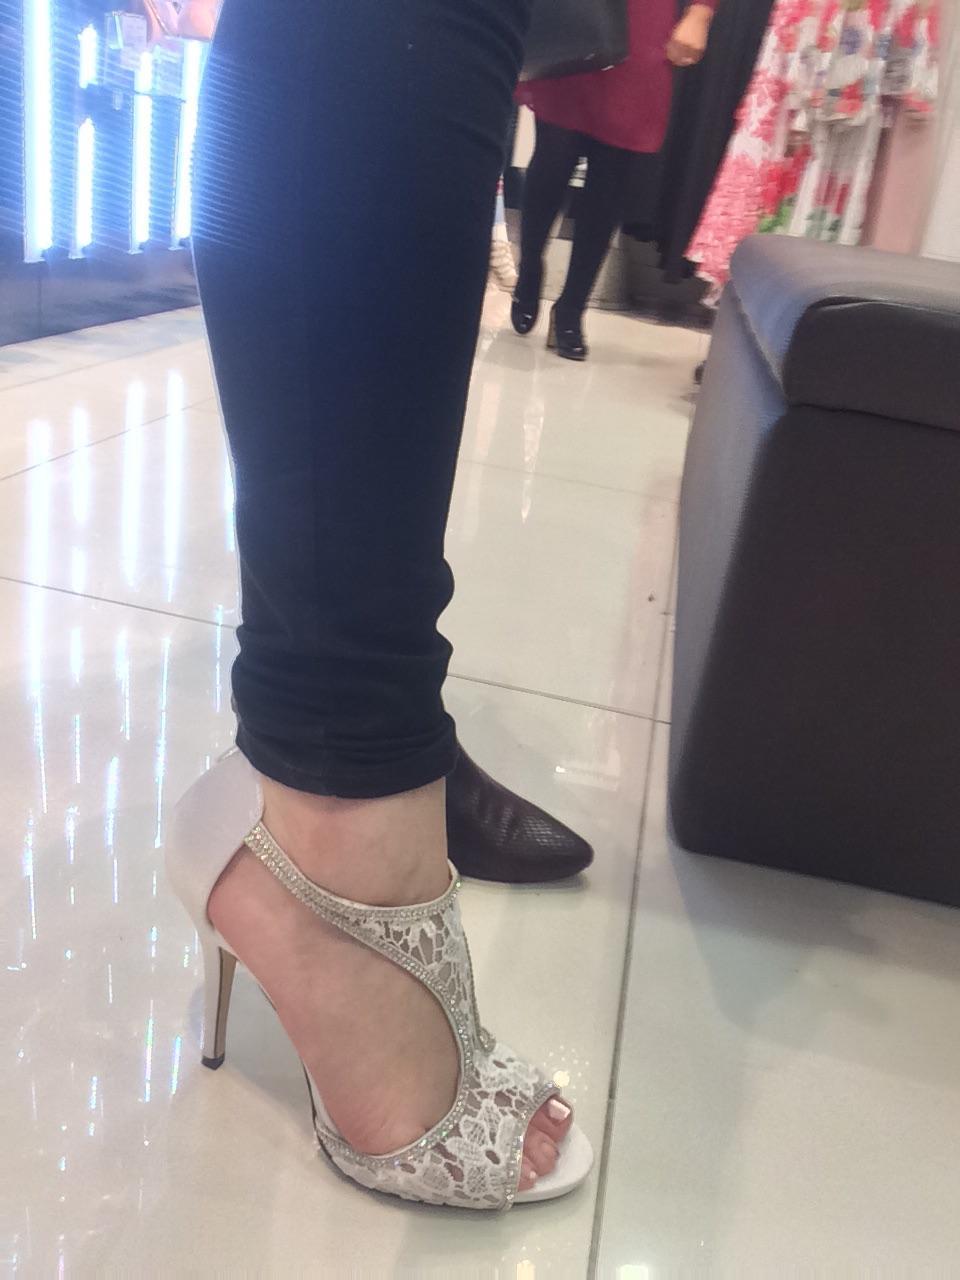 Shoe Shopping Thoughts Feet Toes Footfetis